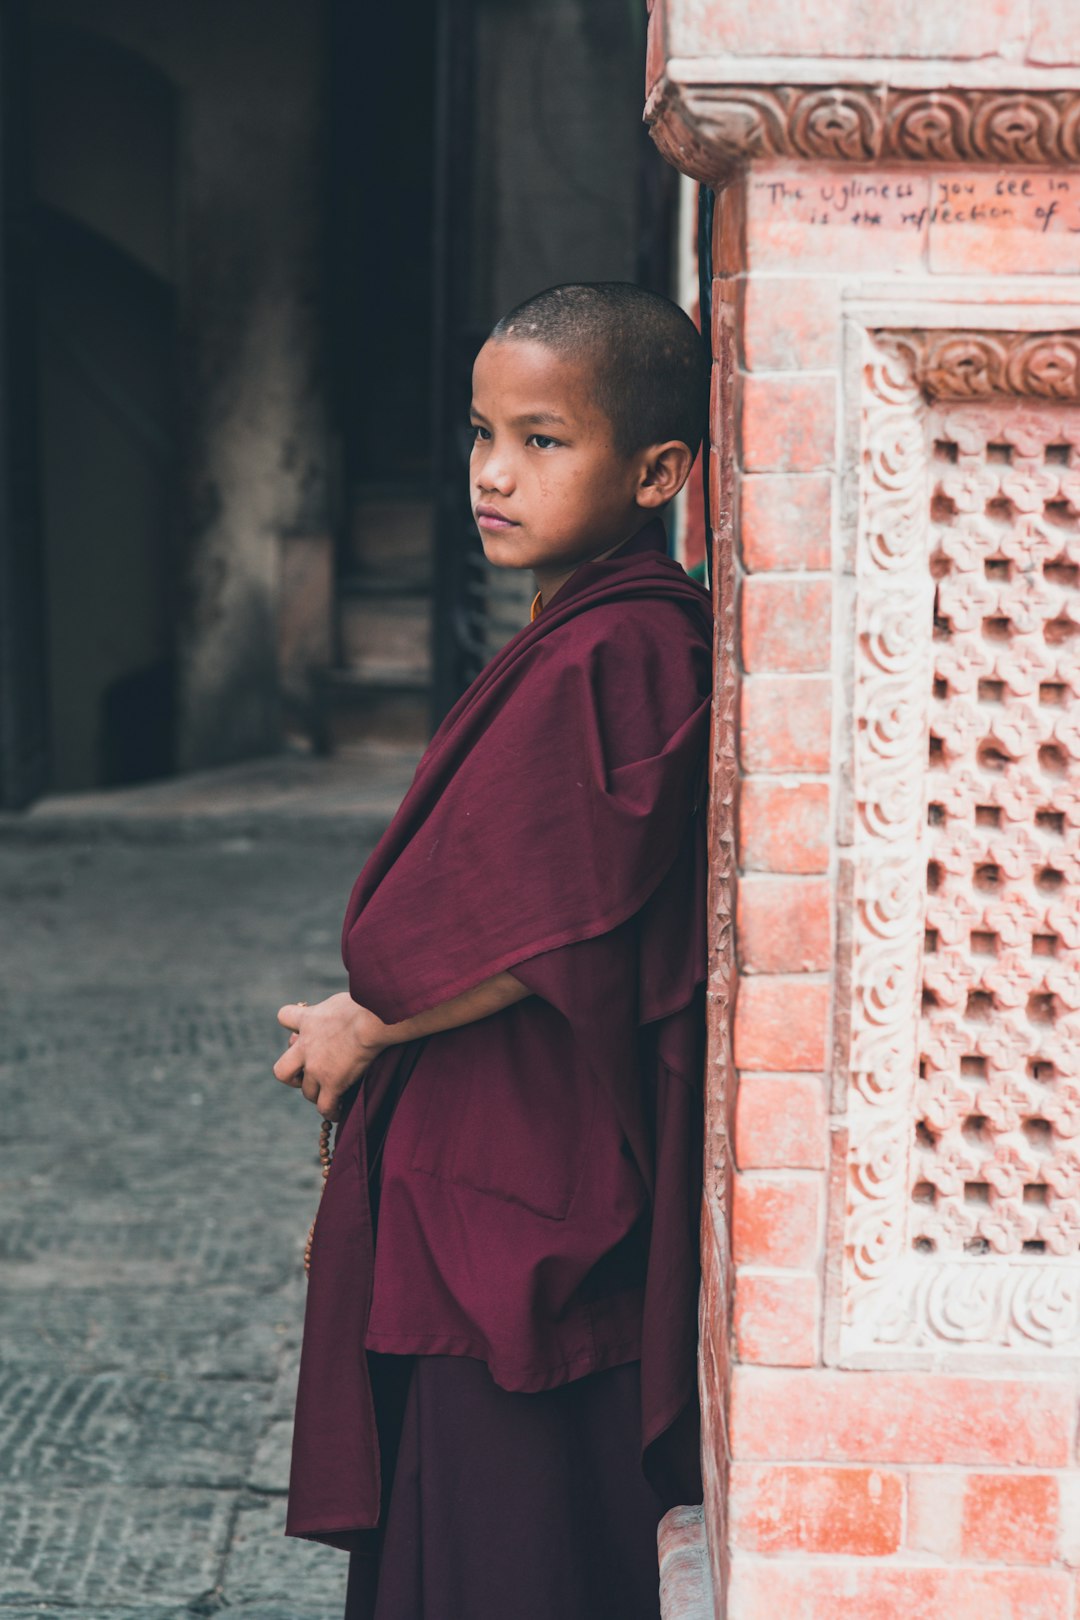 boy in red robe standing near brown brick wall during daytime